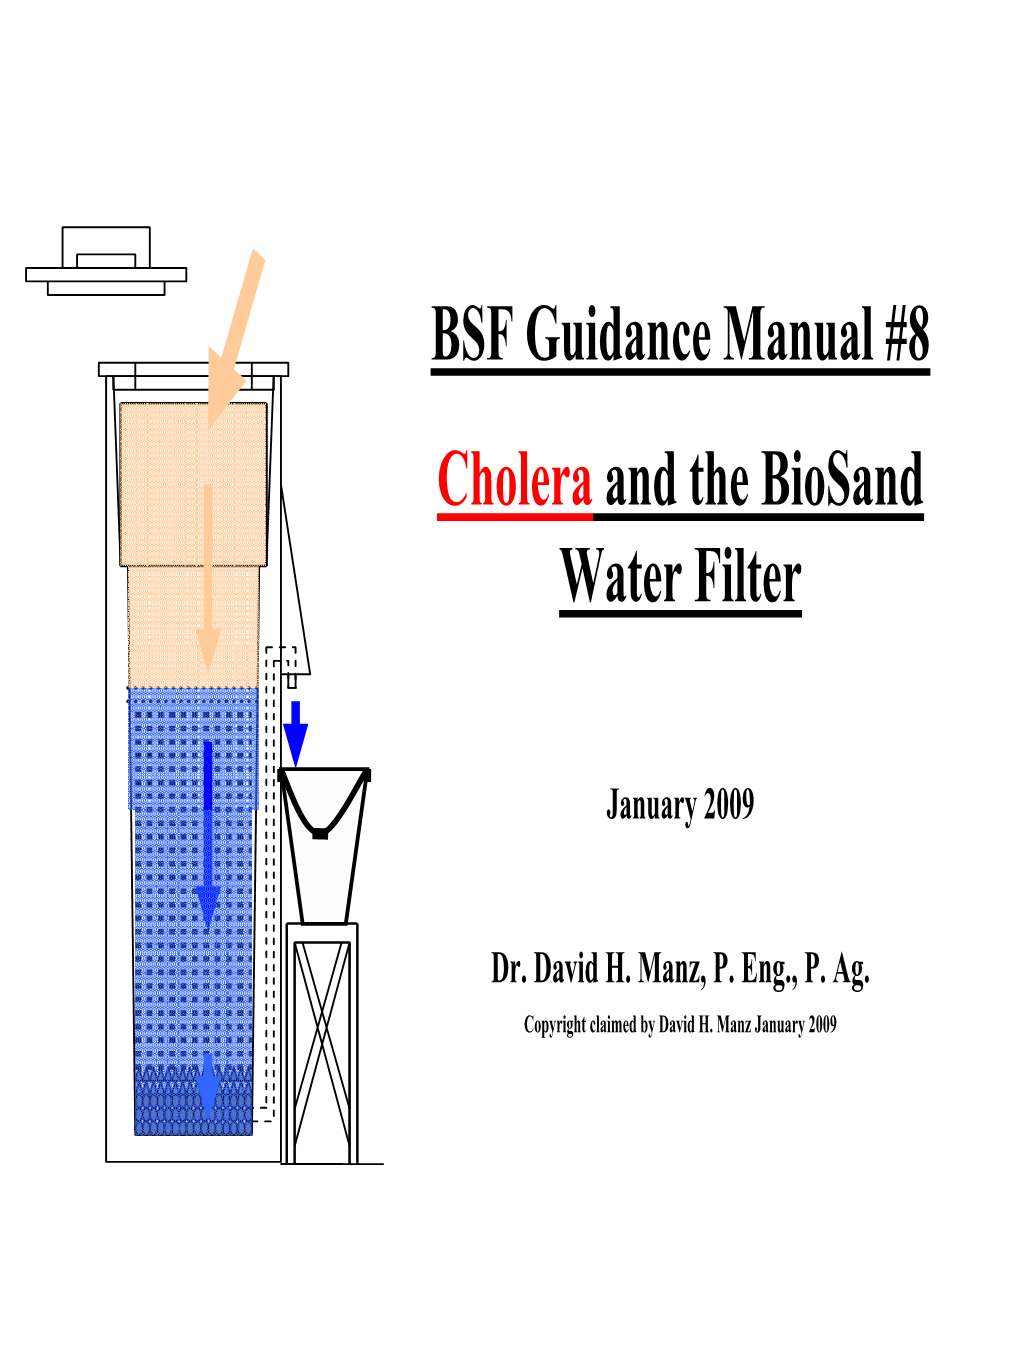 BSF Guidance Manual #8 Cholera and the Biosand Water Filter